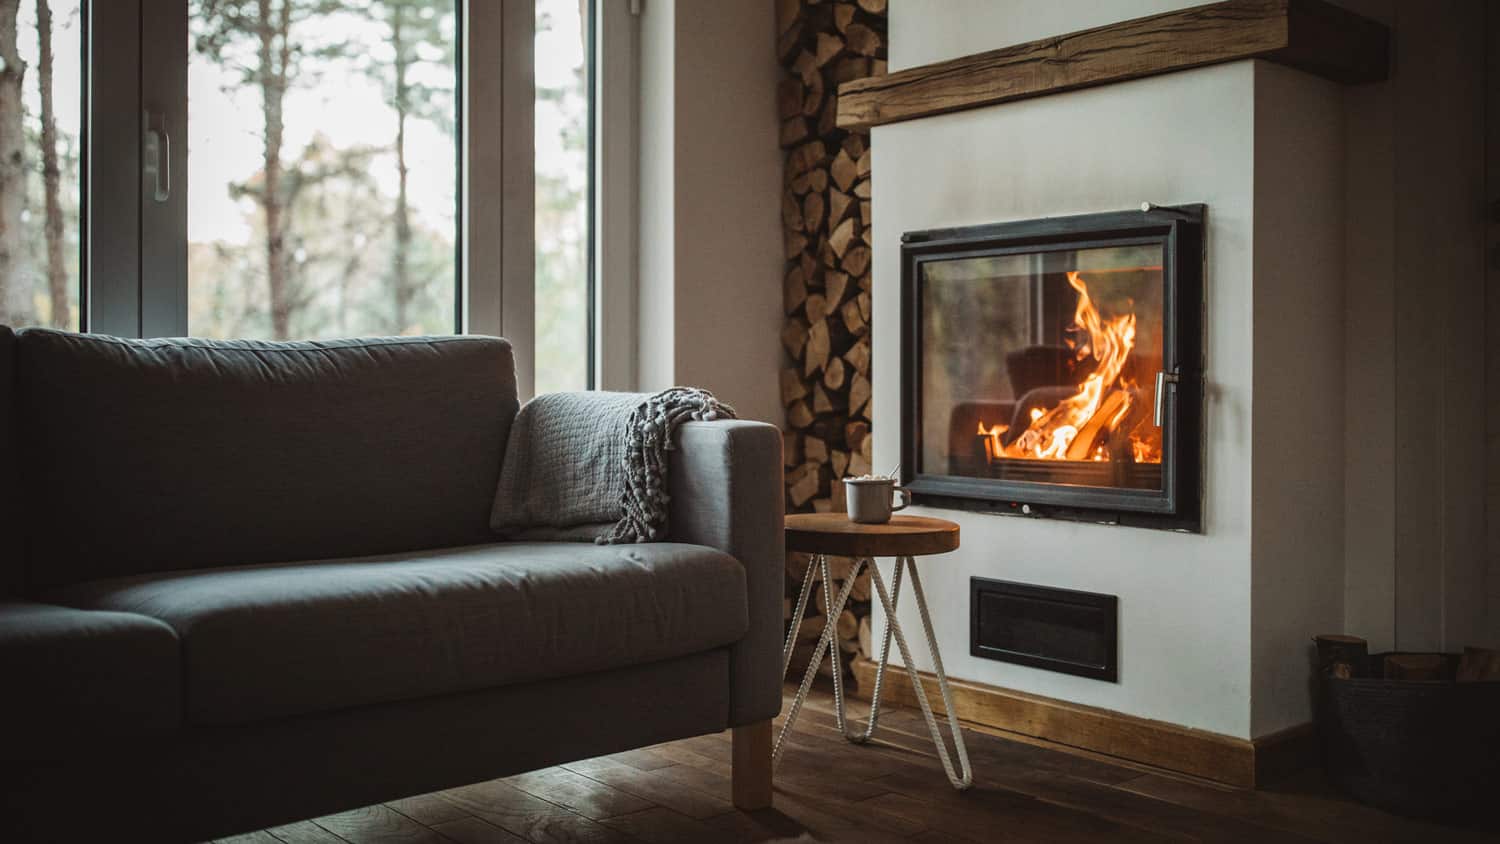 How To Install A Wood Fireplace Insert